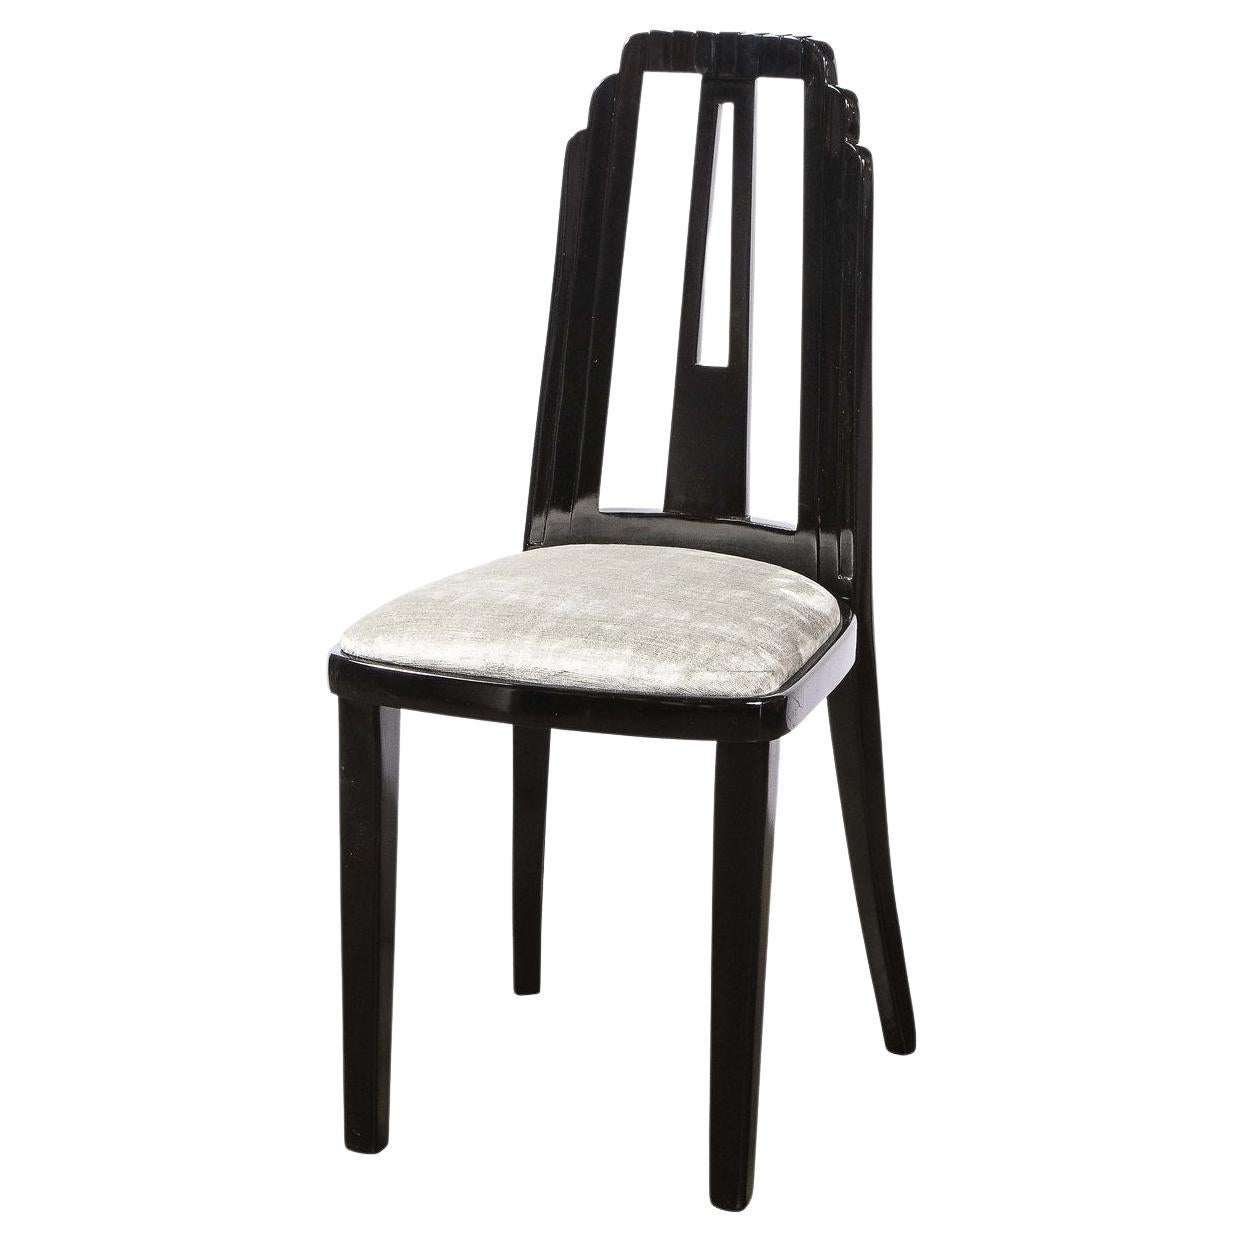 Art Deco Skyscraper Style Dining Chair in Black Lacquer and Smoked Pewter Velvet